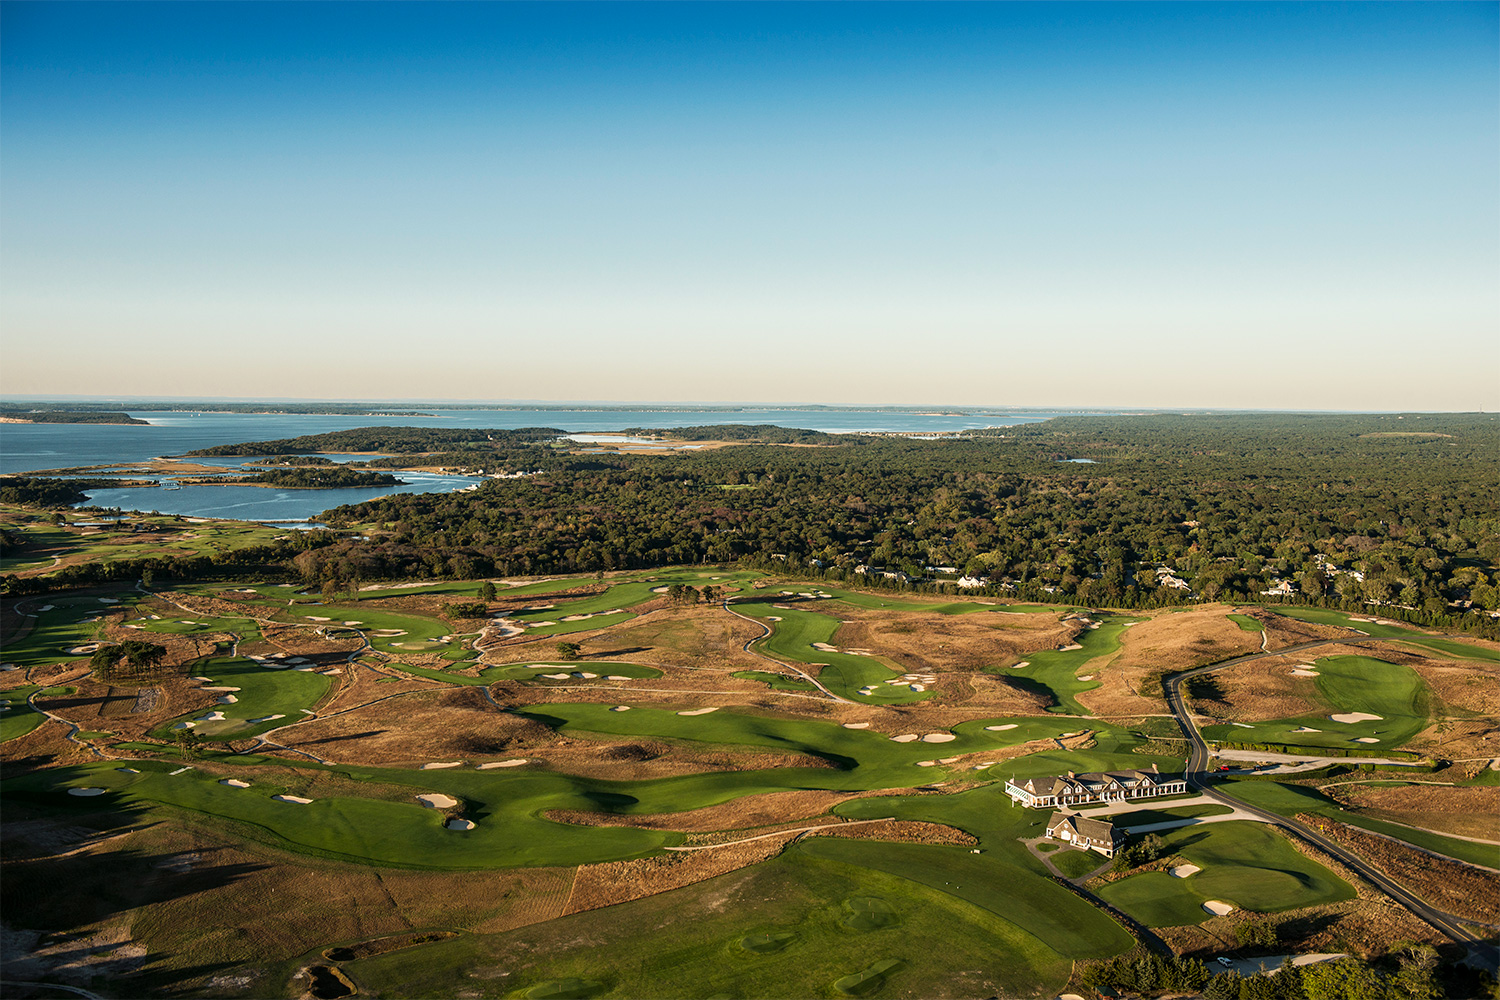 In this view looking north, you can see the front nine on the left and the back nine on the right.